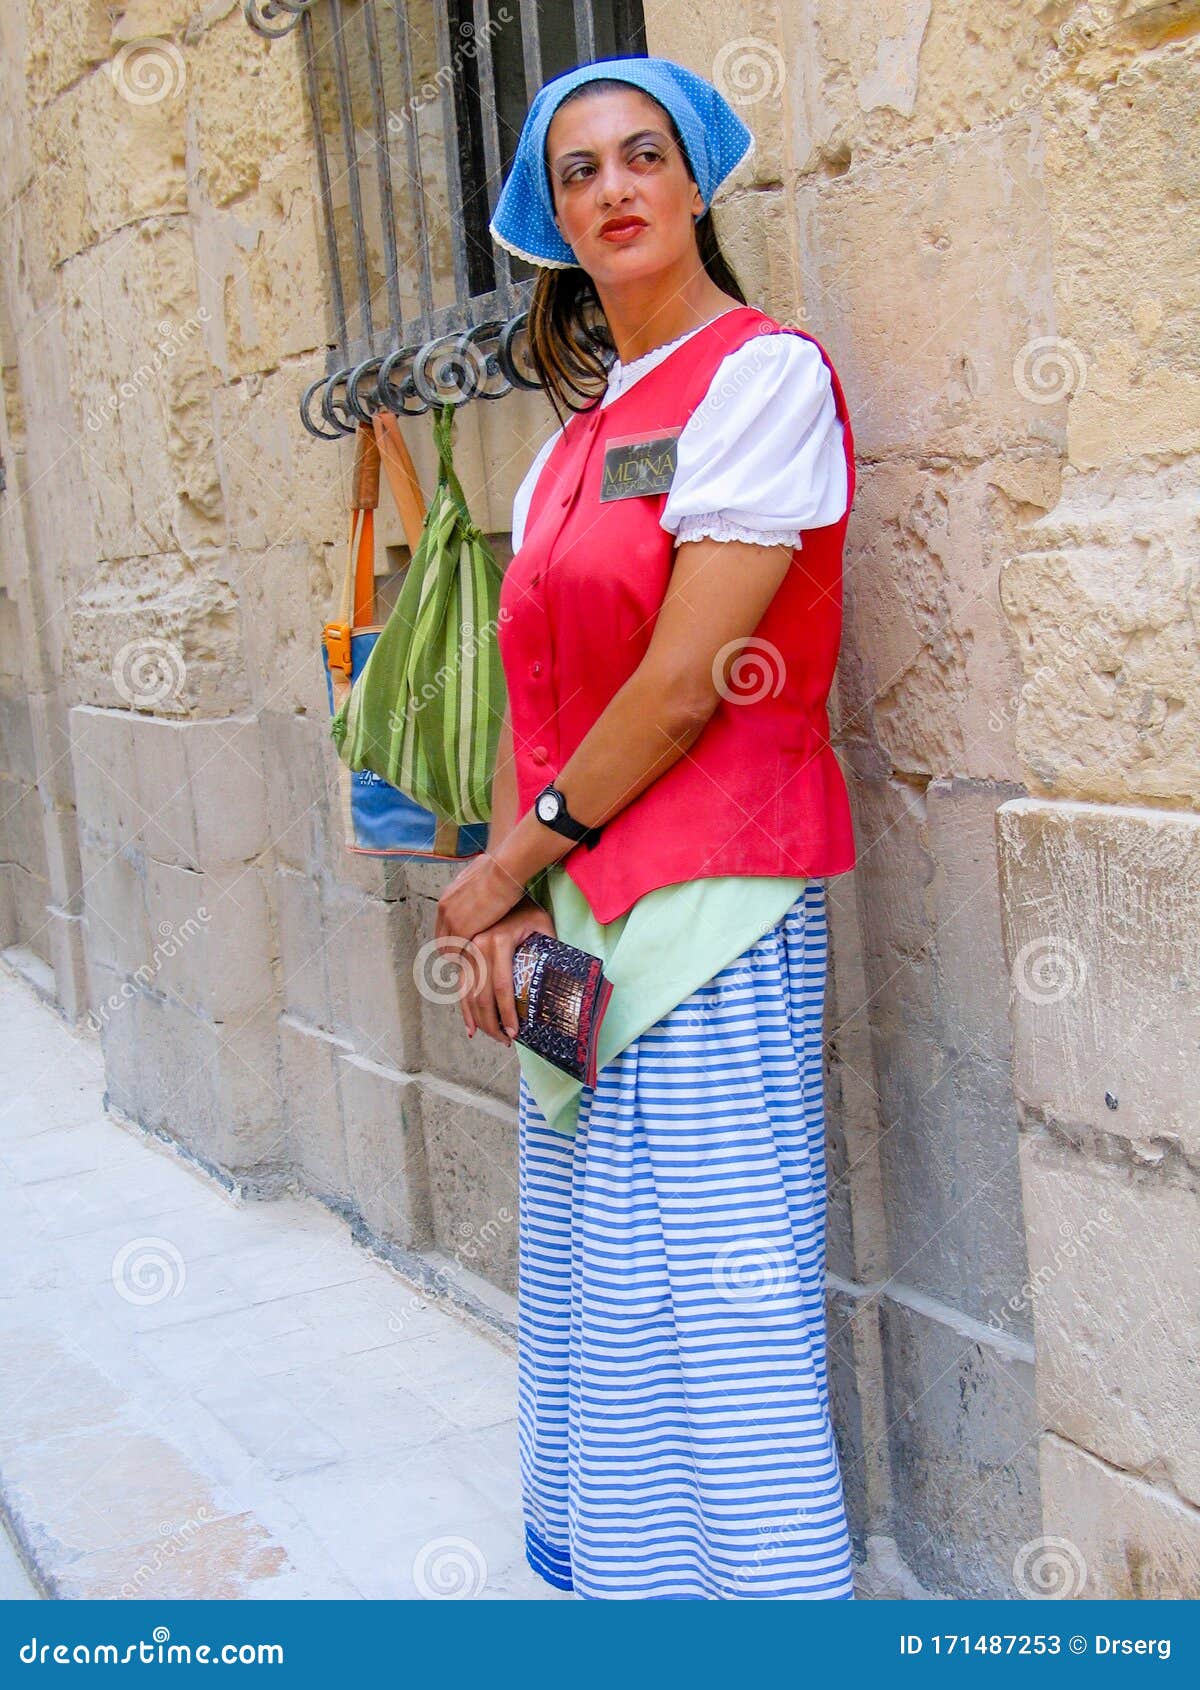 Employee of the Historical Audio-visual Show Editorial Stock Photo - Image of mediterranean, headscarf: 171487253